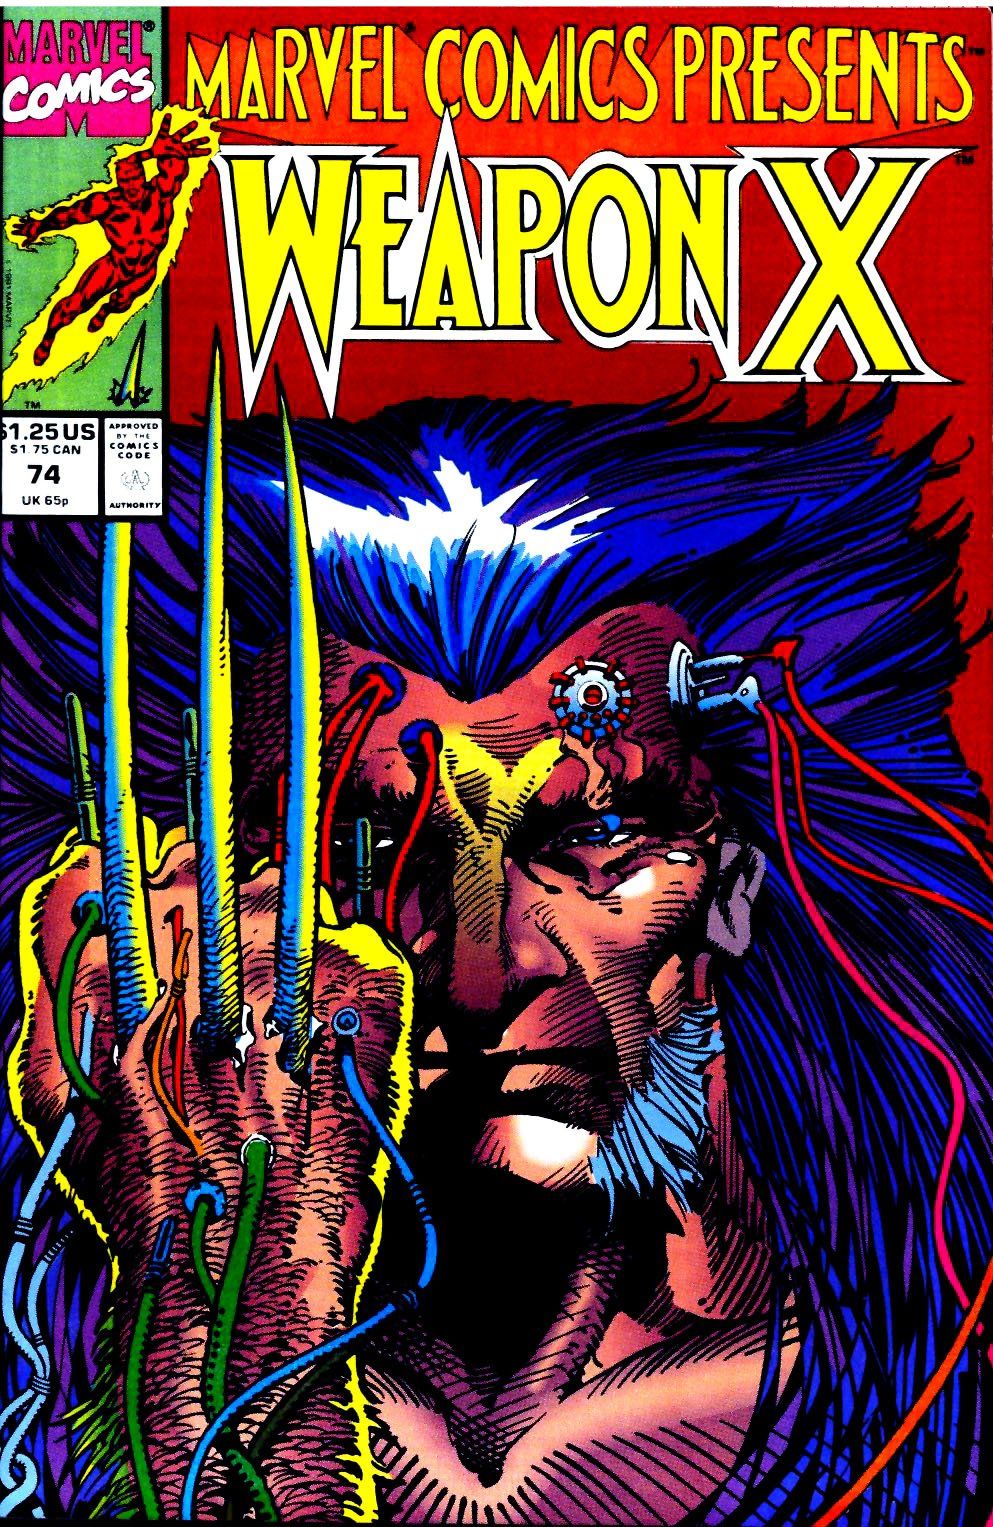 Barry Windsor-Smith's Weapon X serial